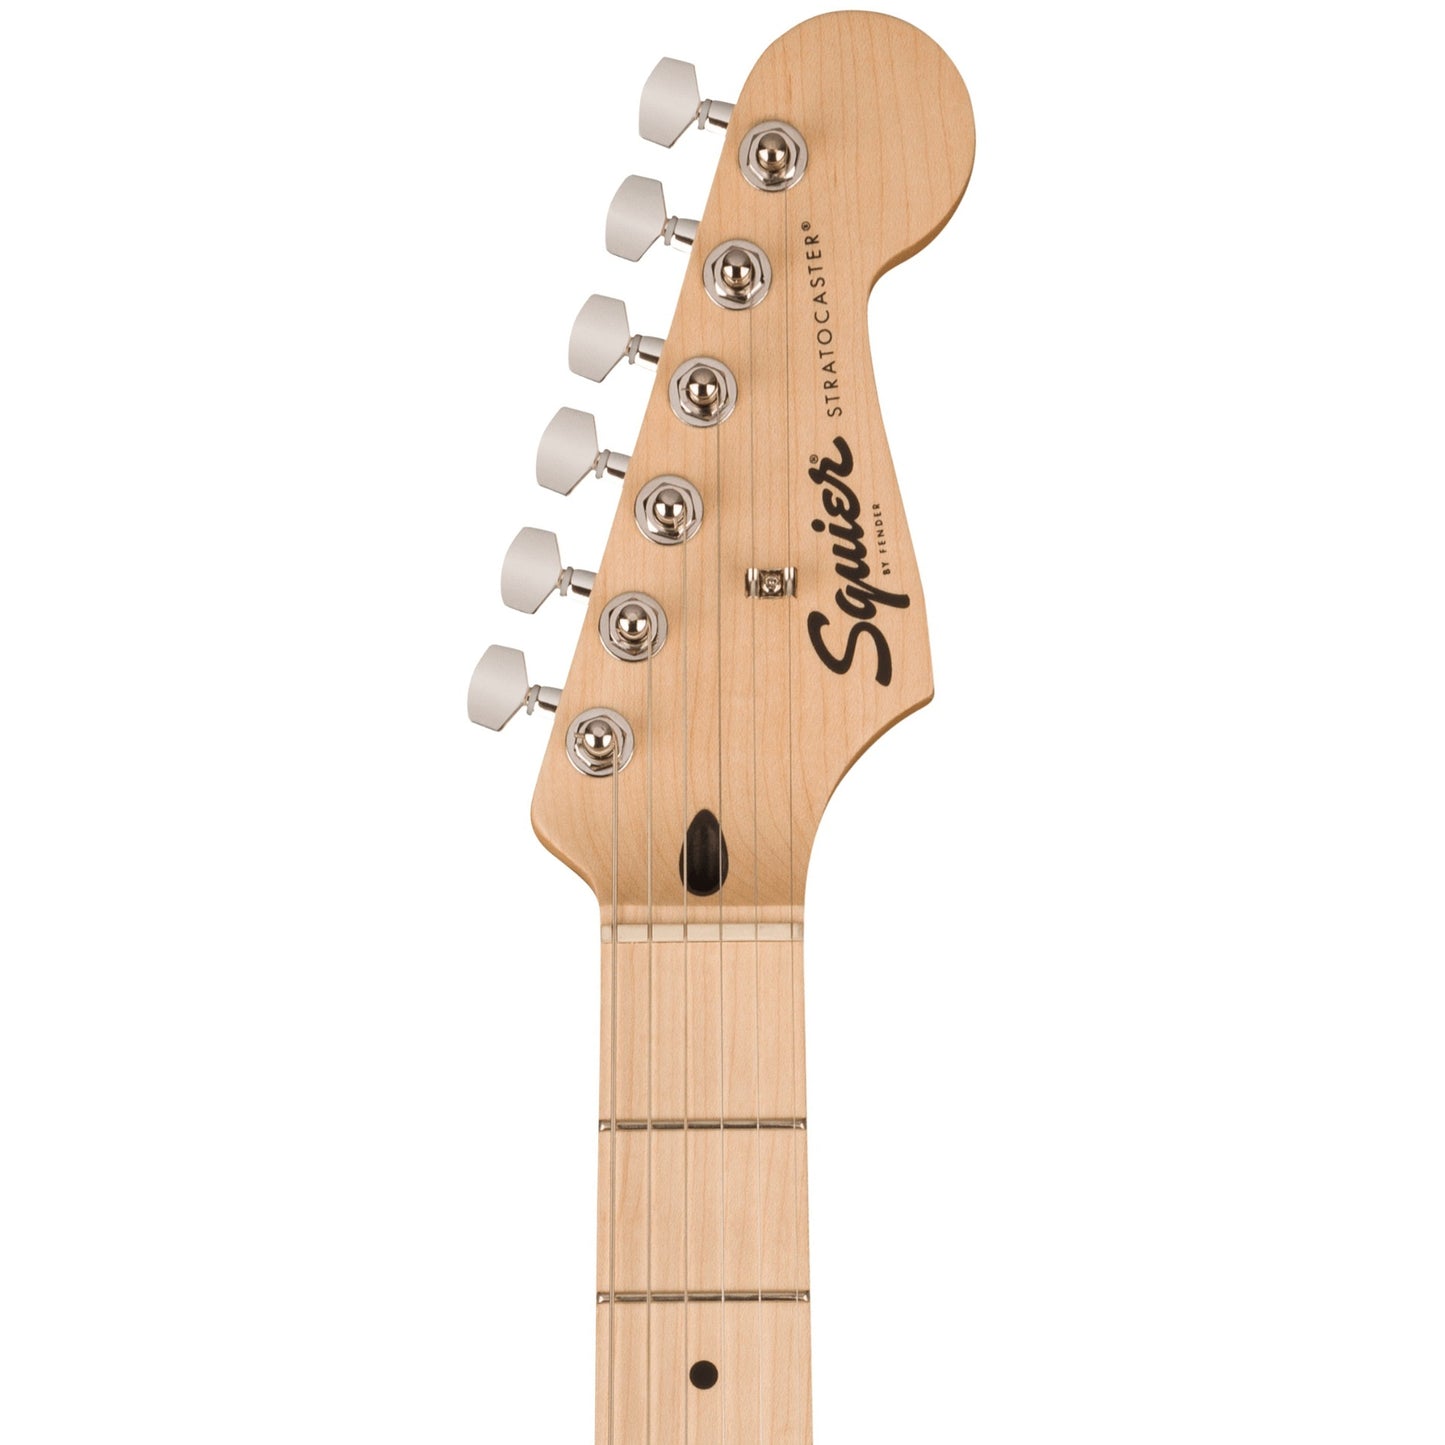 Squier Sonic Stratocaster HSS Electric Guitar - Tahitian Coral